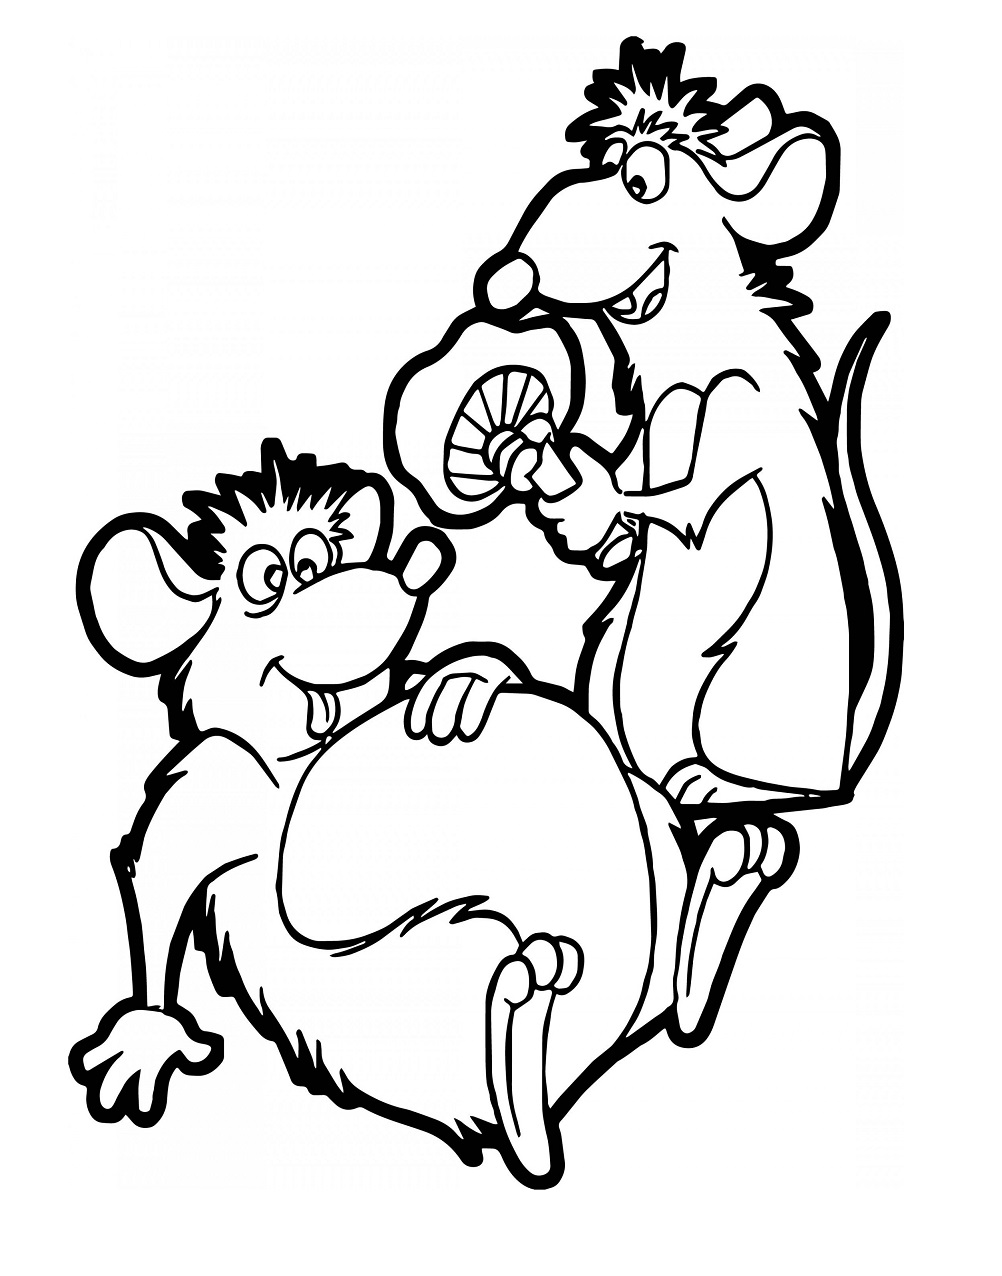 Download Funny Remy And Emile Coloring Page - Free Printable Coloring Pages for Kids